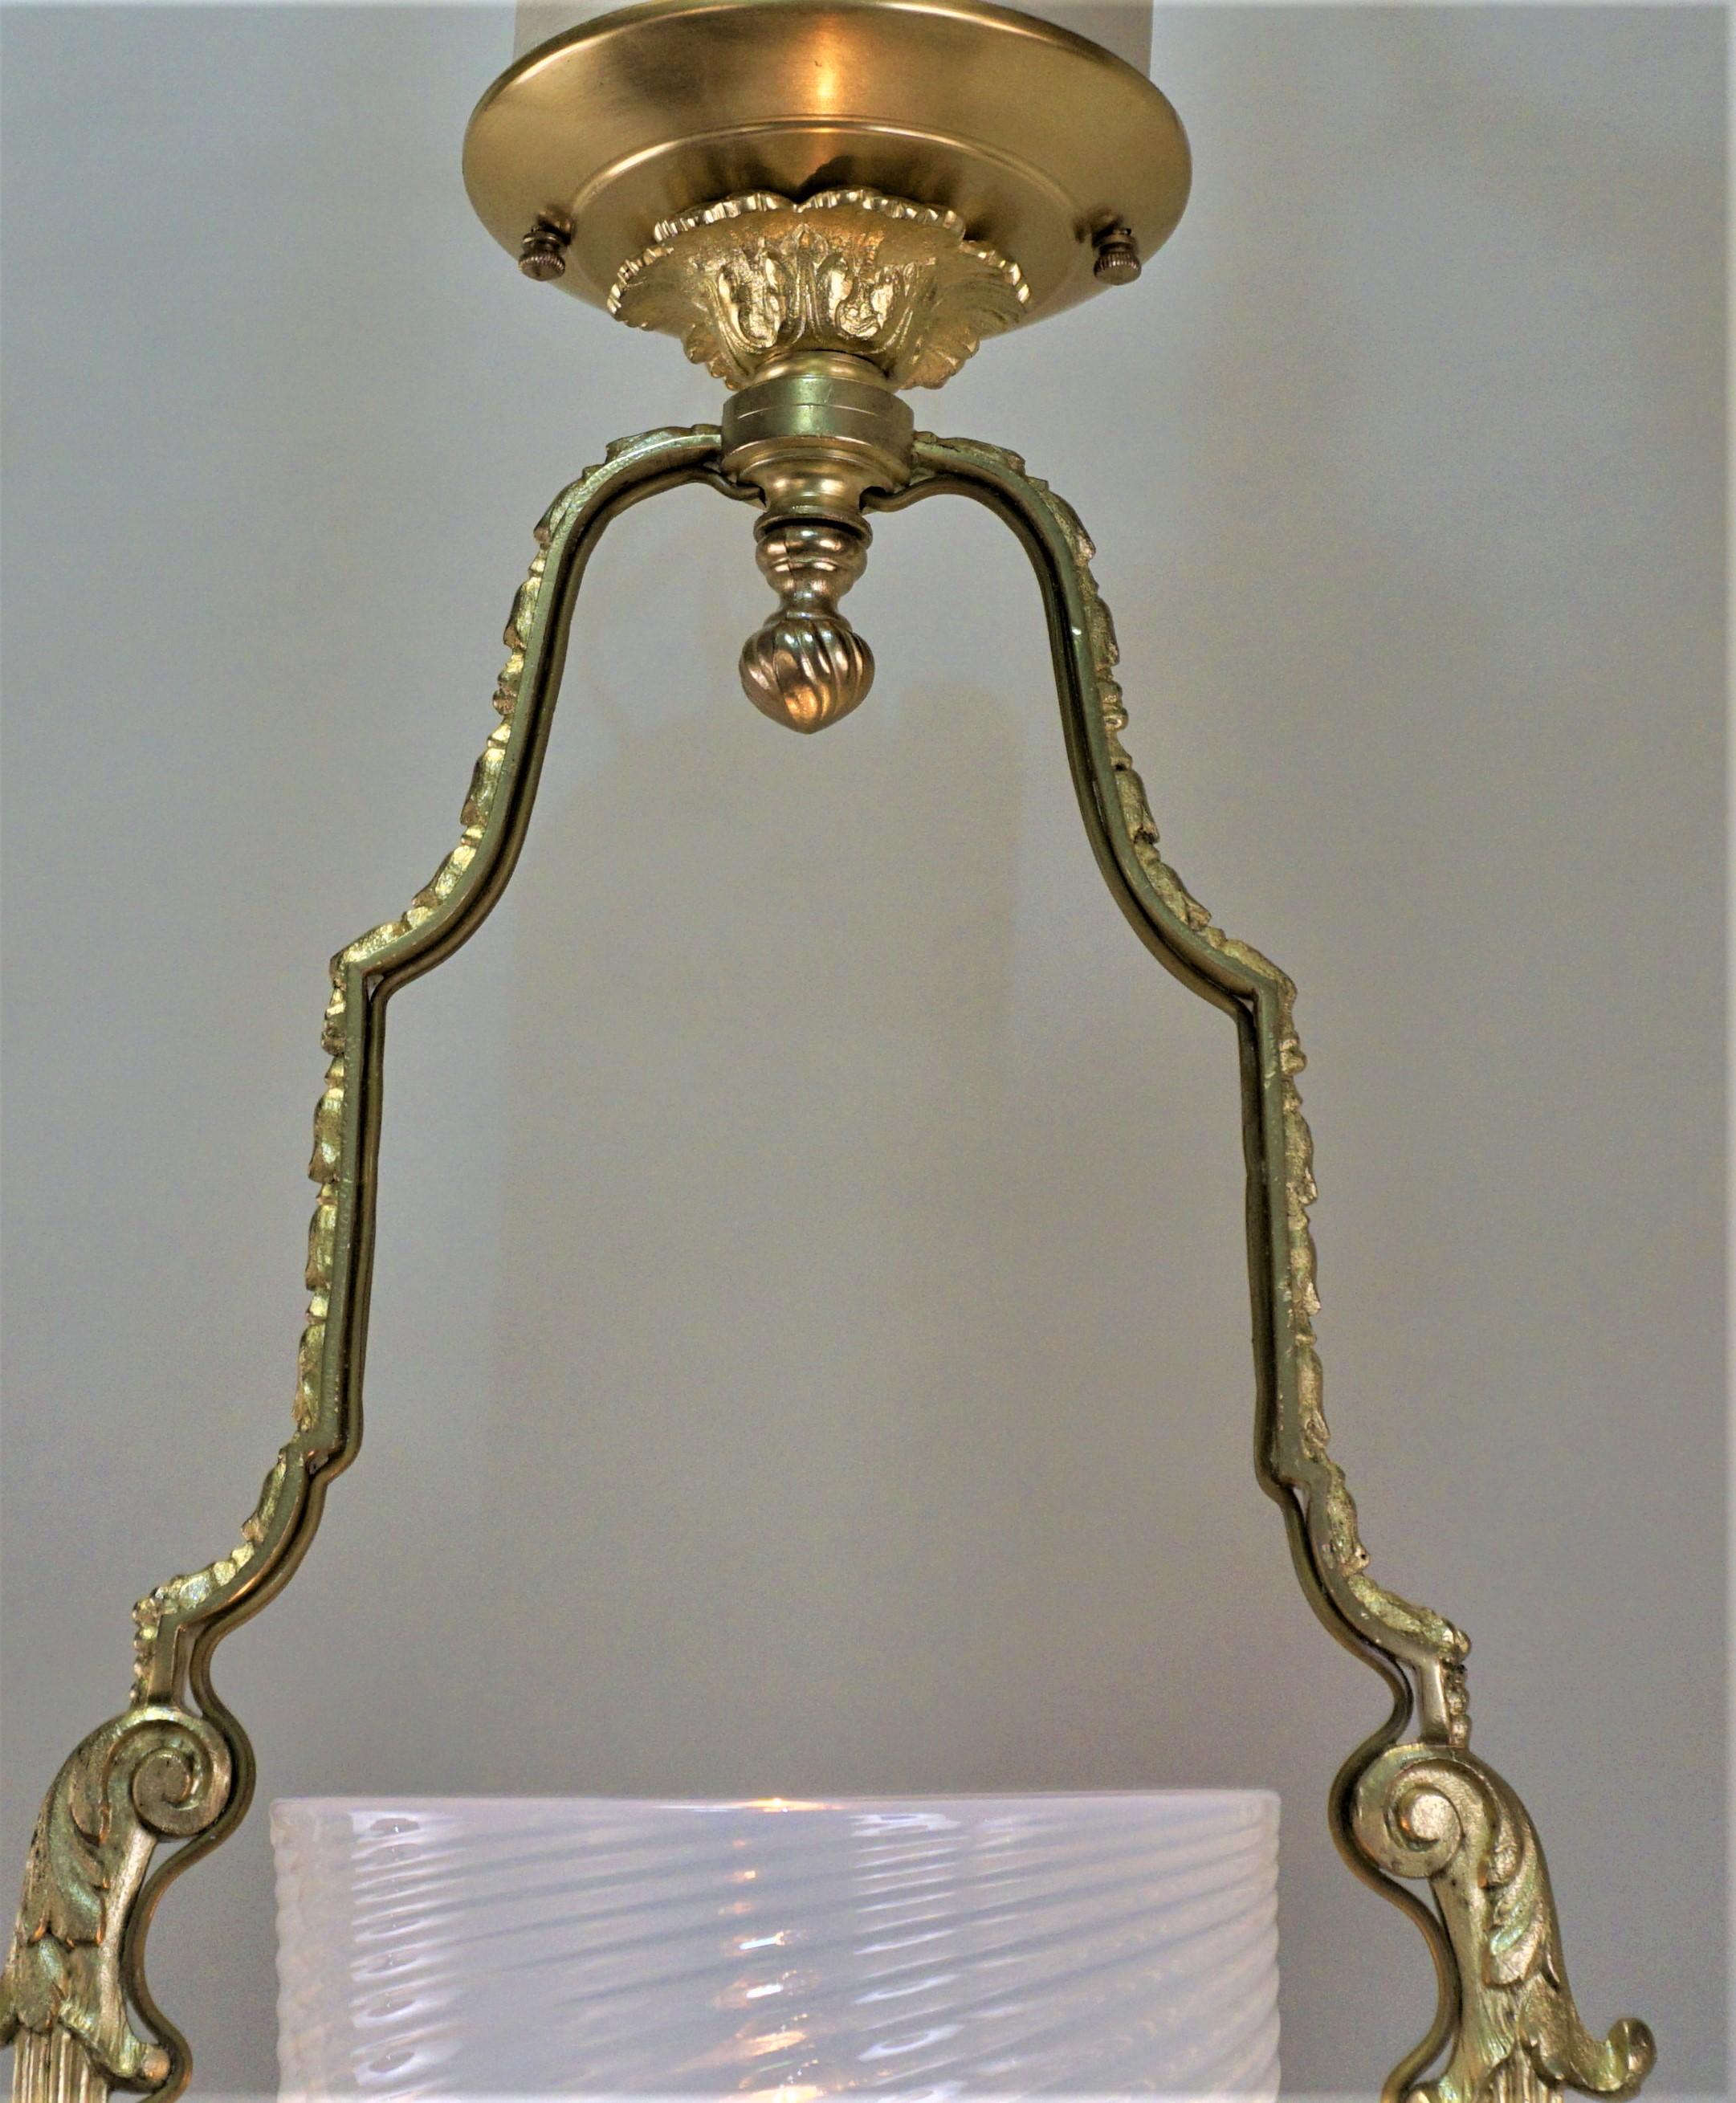 Beautiful bronze frame with opalescent glass shade chandelier - lantern.